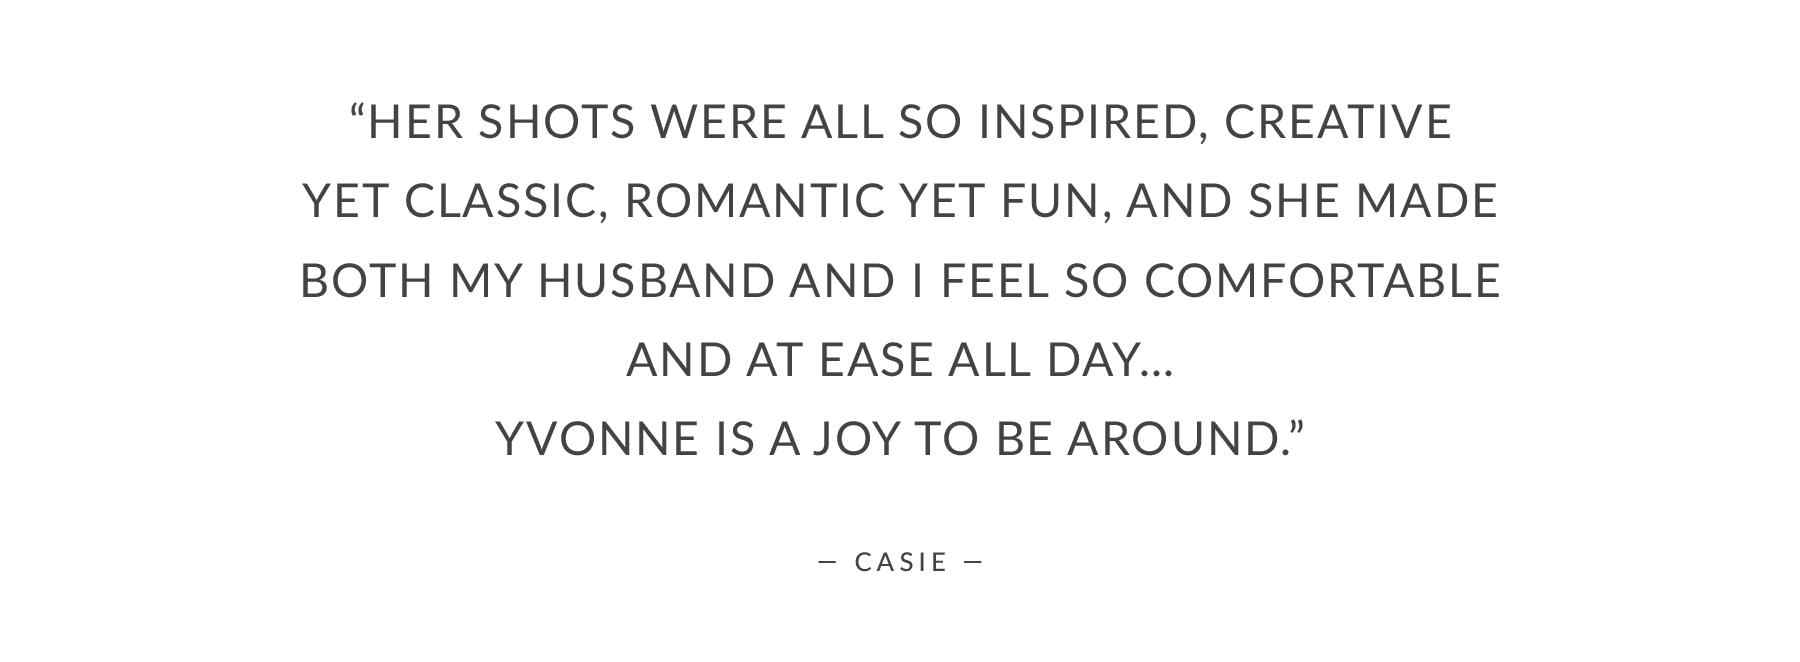 “Her shots were all so inspired, creative yet classic, romantic yet fun, and she made both my husband and I feel so comfortable and at ease all day… Yvonne is a joy to be around.”